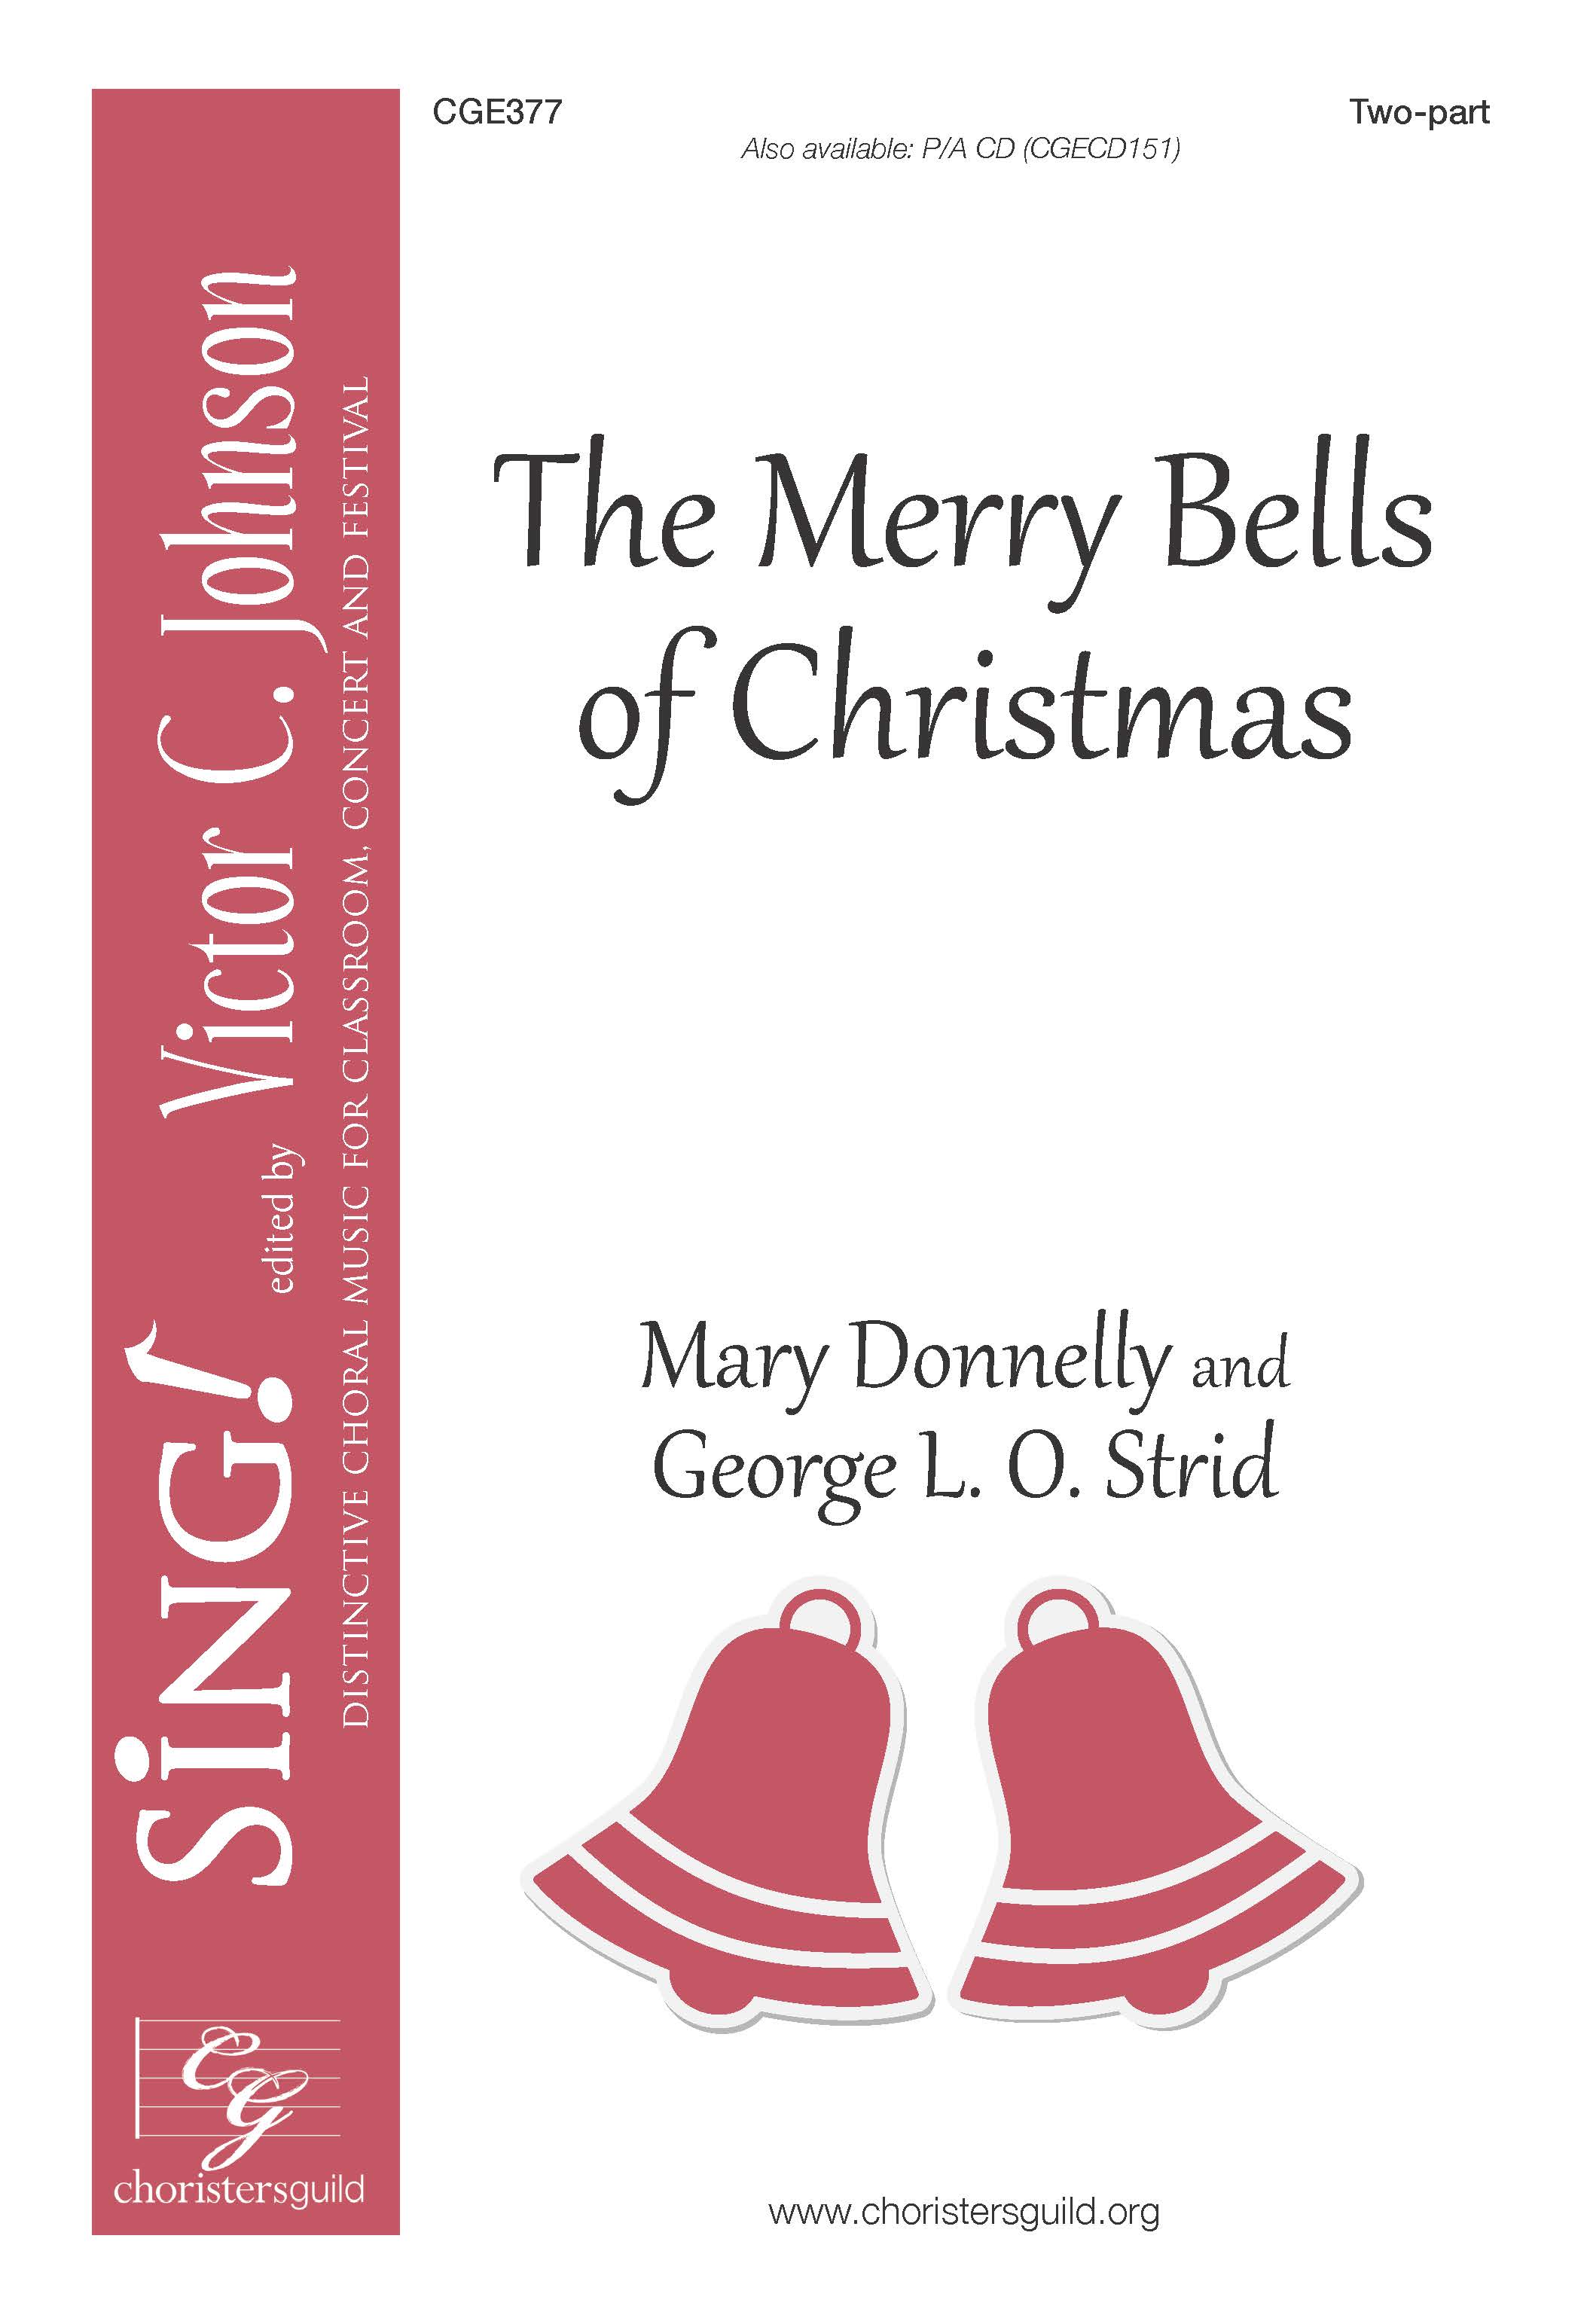 The Merry Bells of Christmas - Two-part